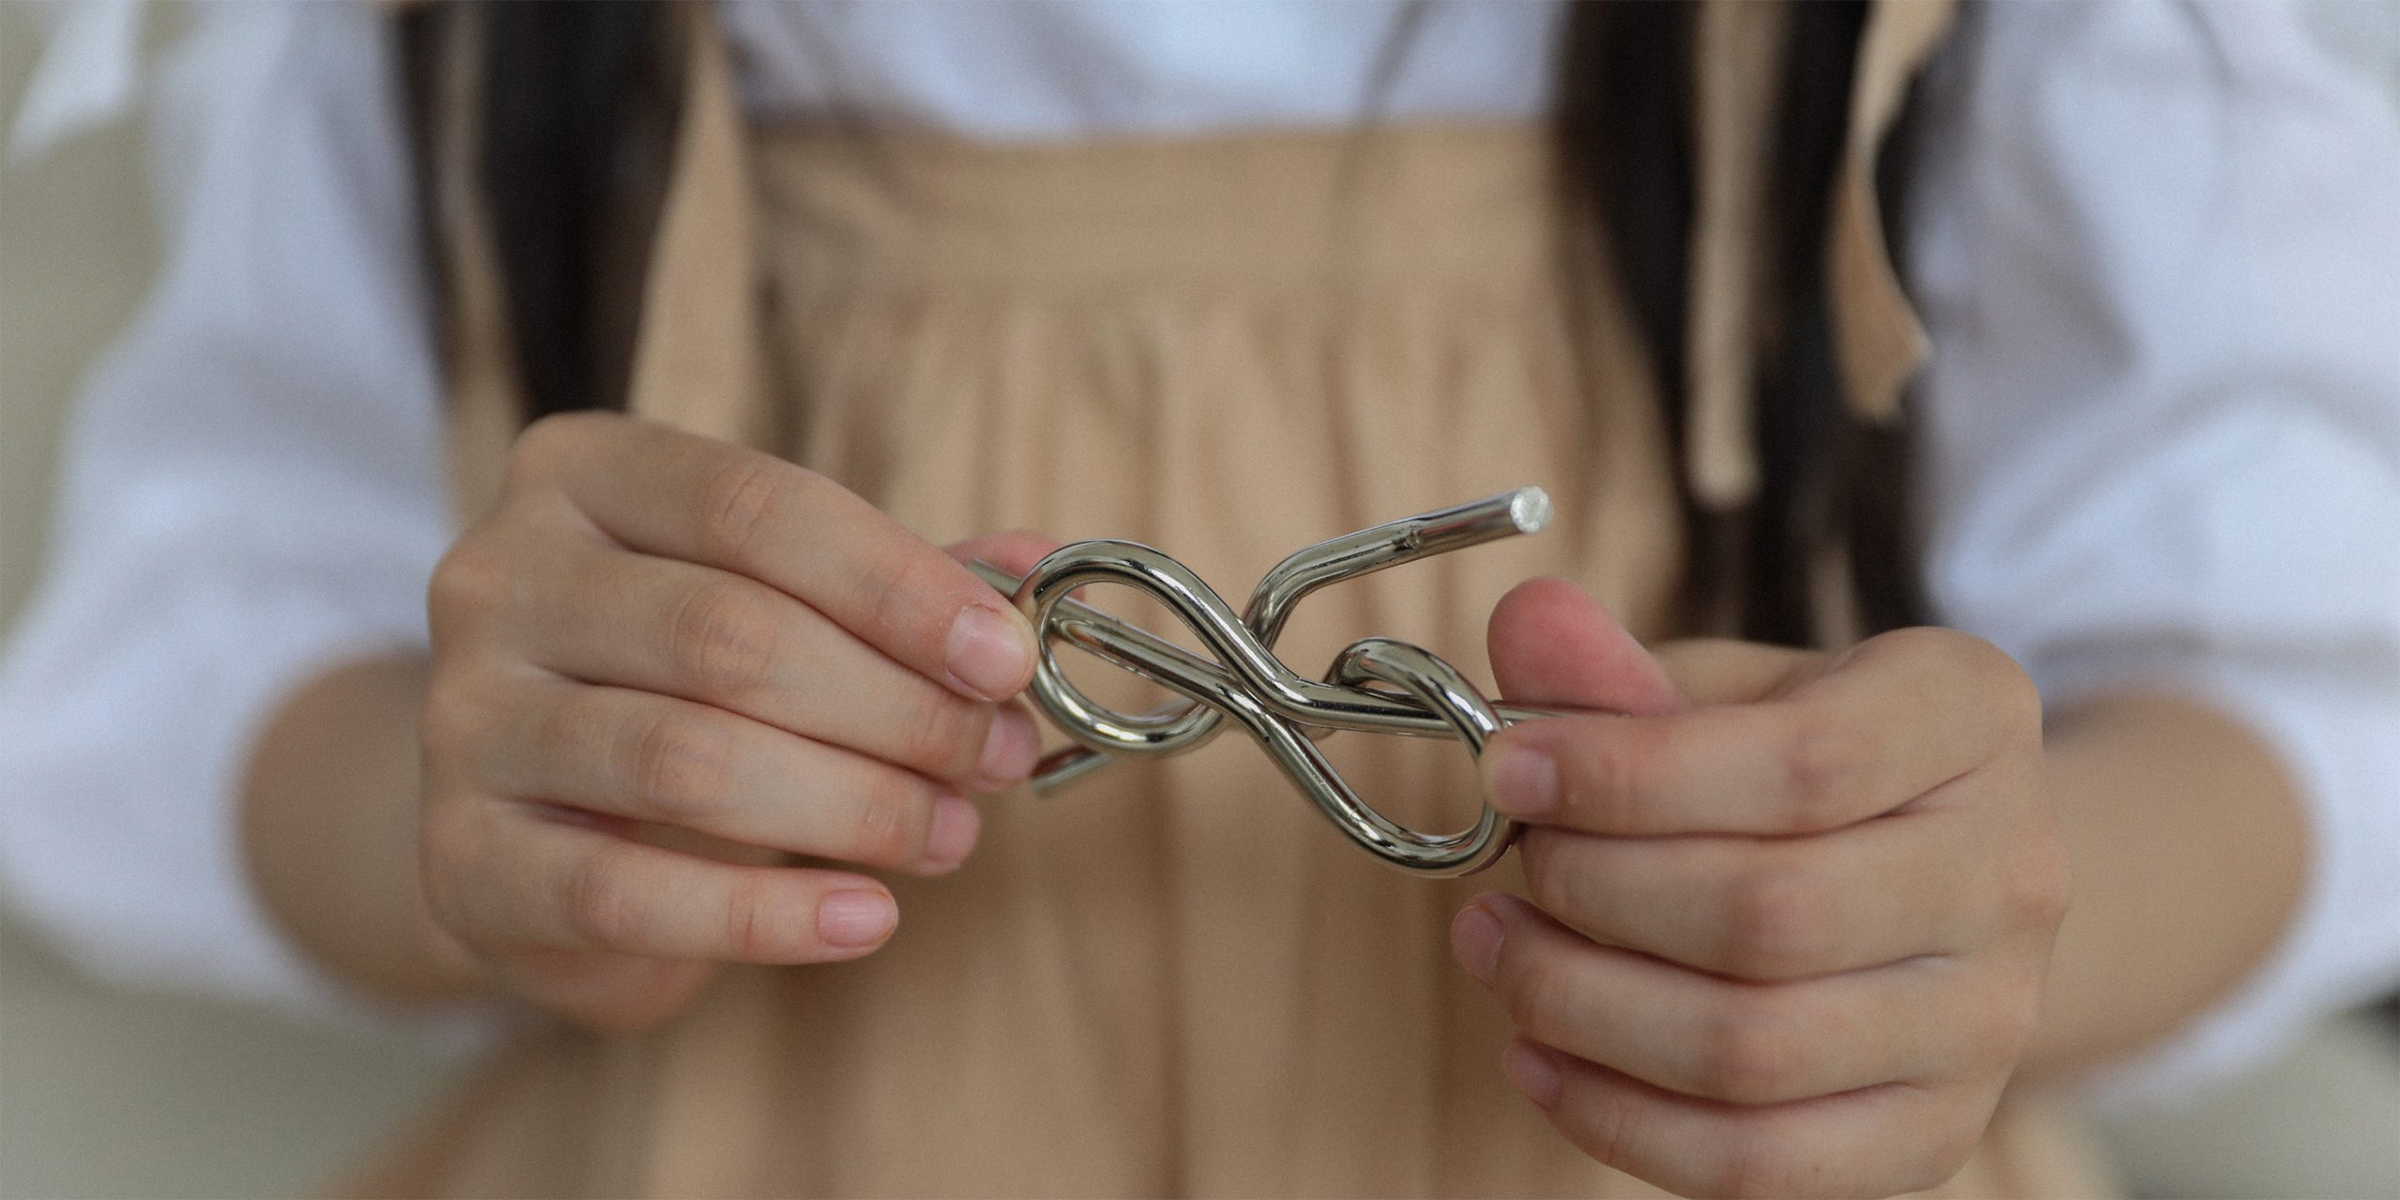 Close up image of two hands holding a twisted metal tangle puzzle